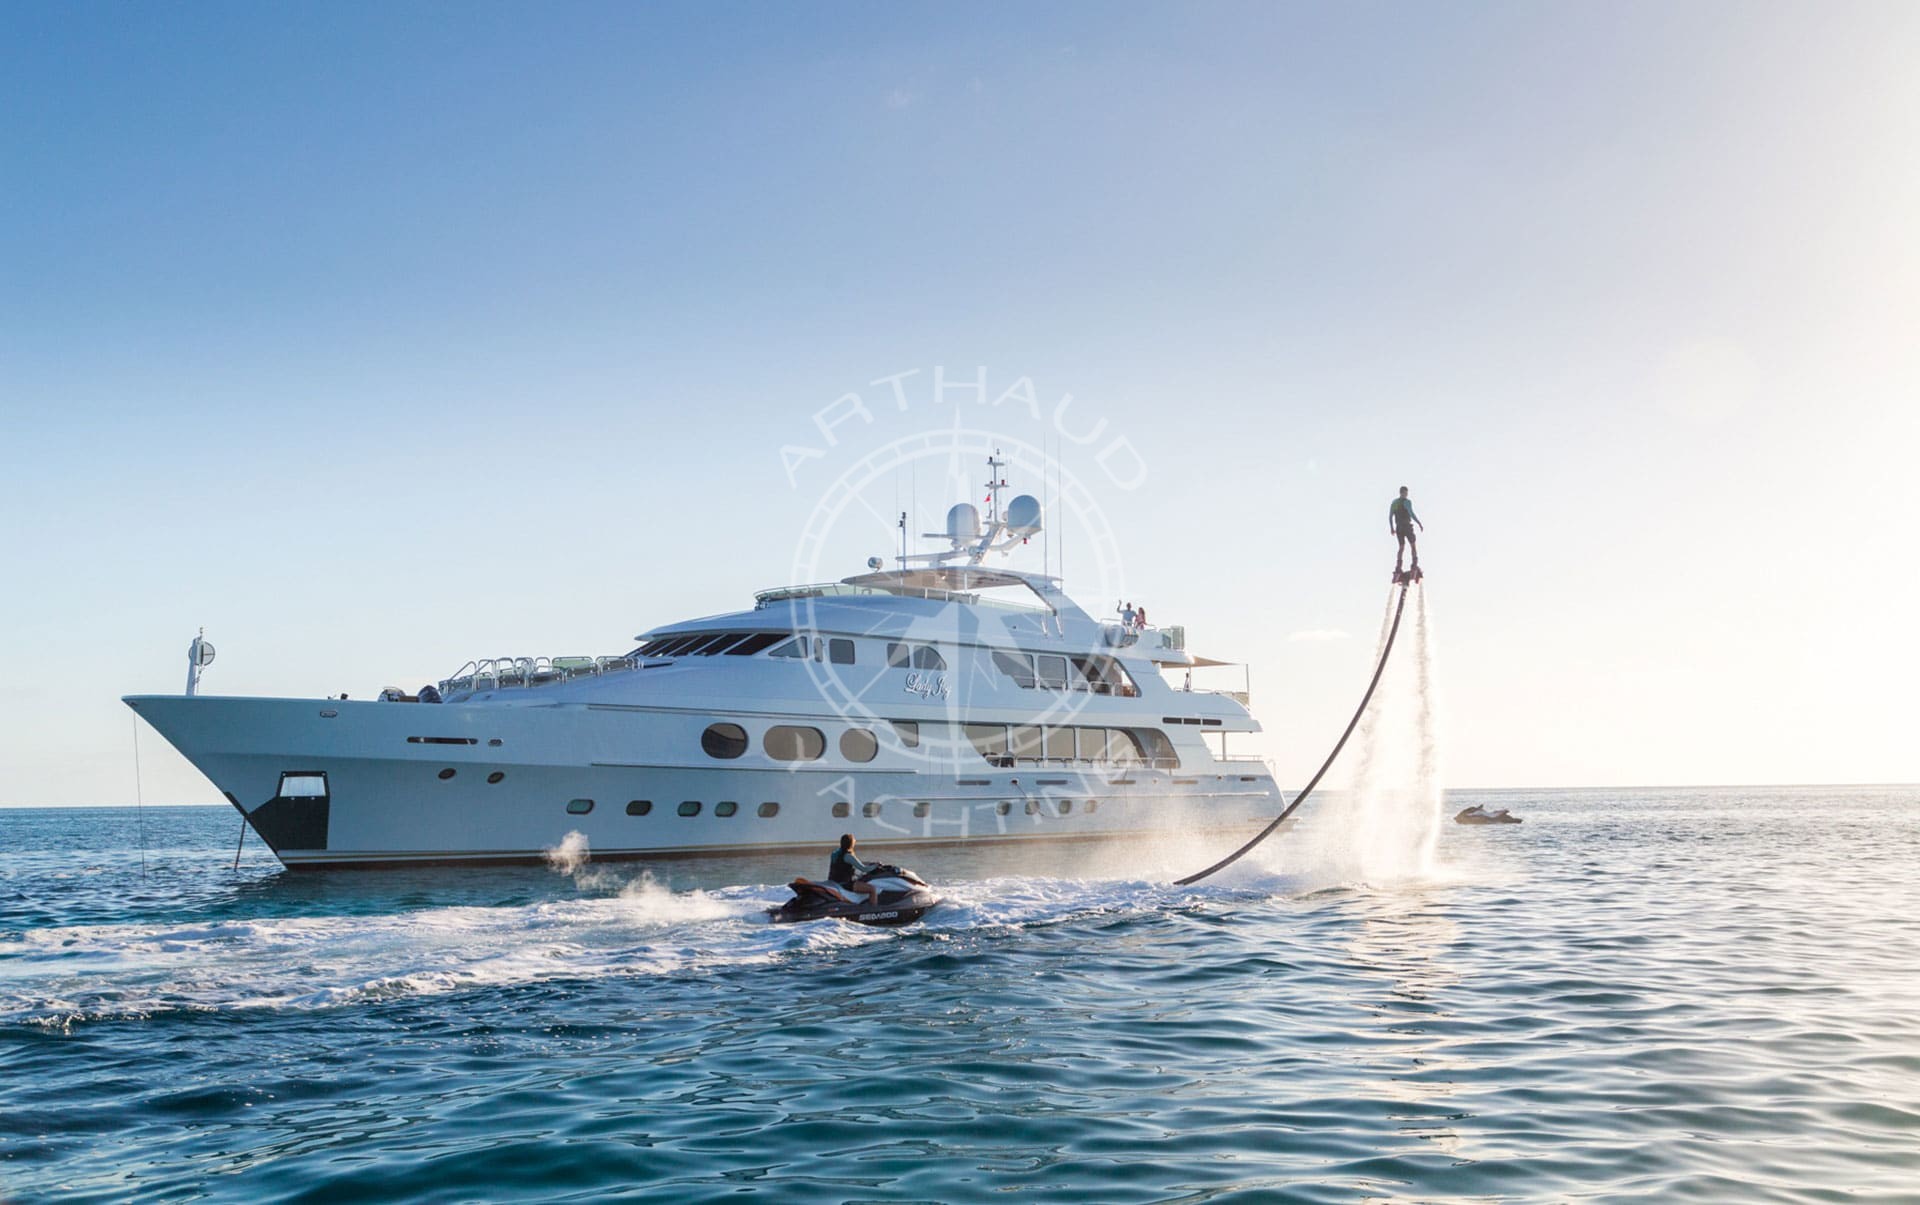 yacht rental cannes